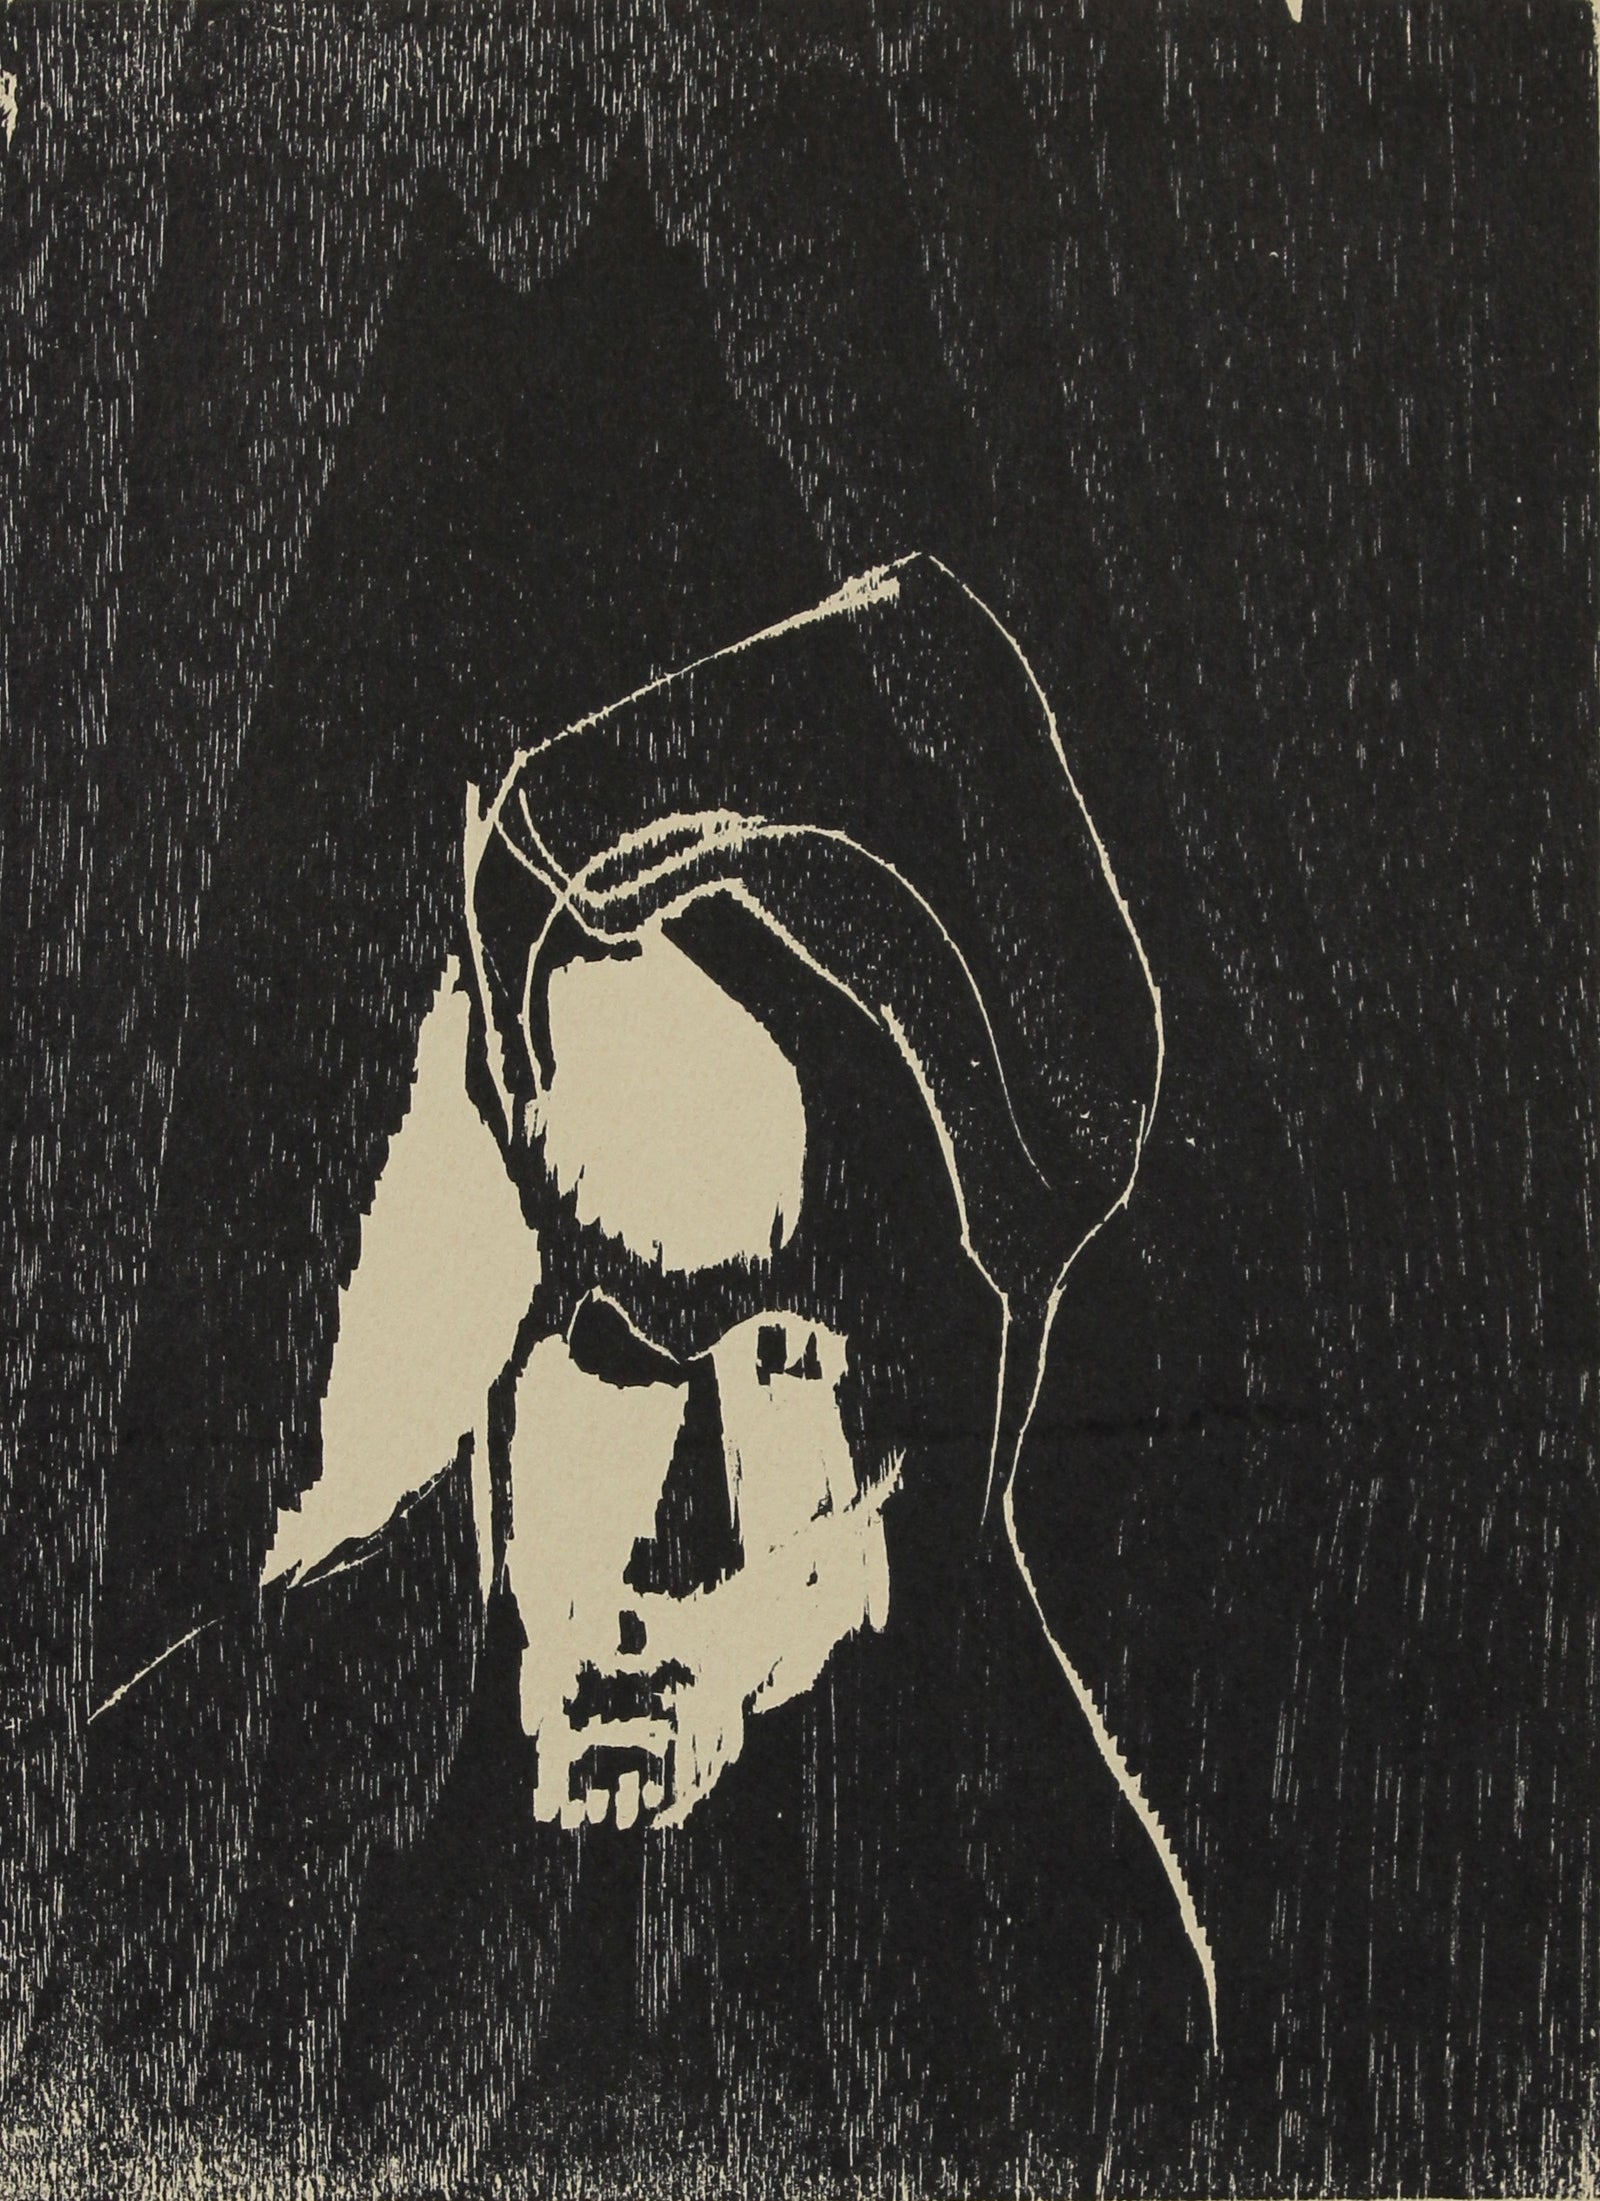 Abstracted Face Woodcut<br>1960-70s<br><br>#2185